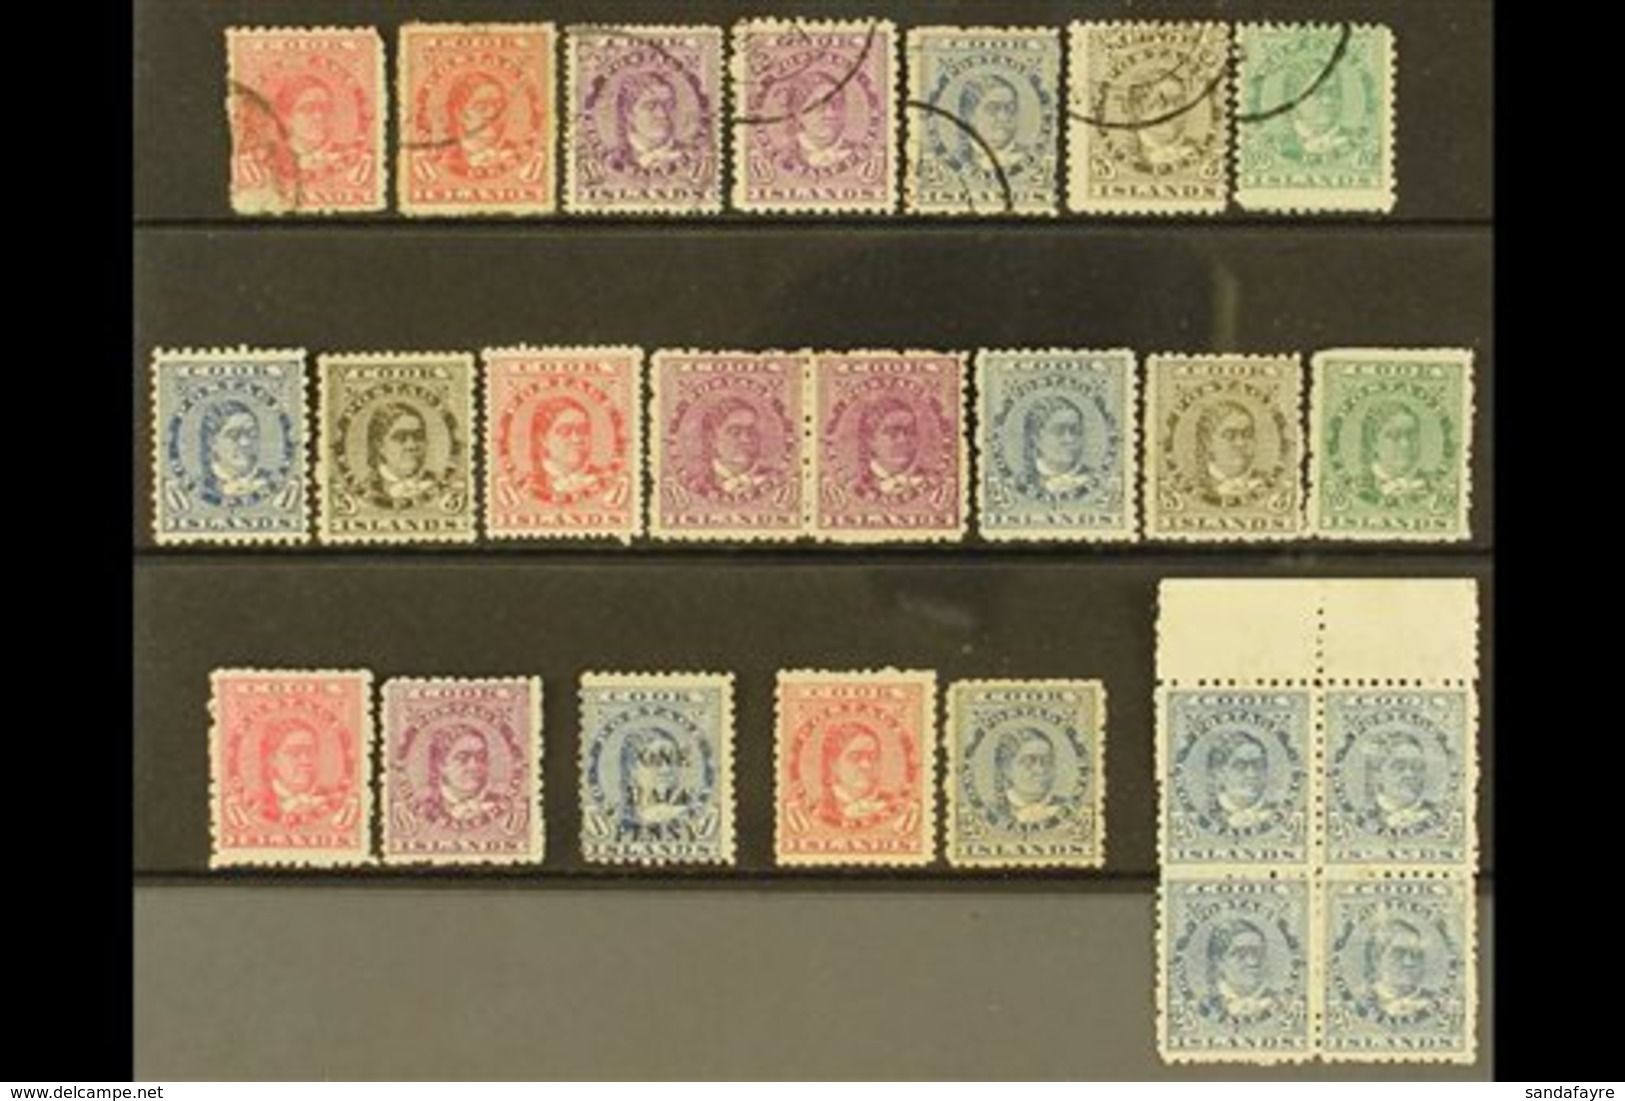 1893 - 1913 QUEEN MAKEA TAKAU ISSUES  1893 Vals To 5d Olive, Perf 11 Vals To 10d Used, 1899 ½d On 1d Blue, 1902 No Wmk O - Cook